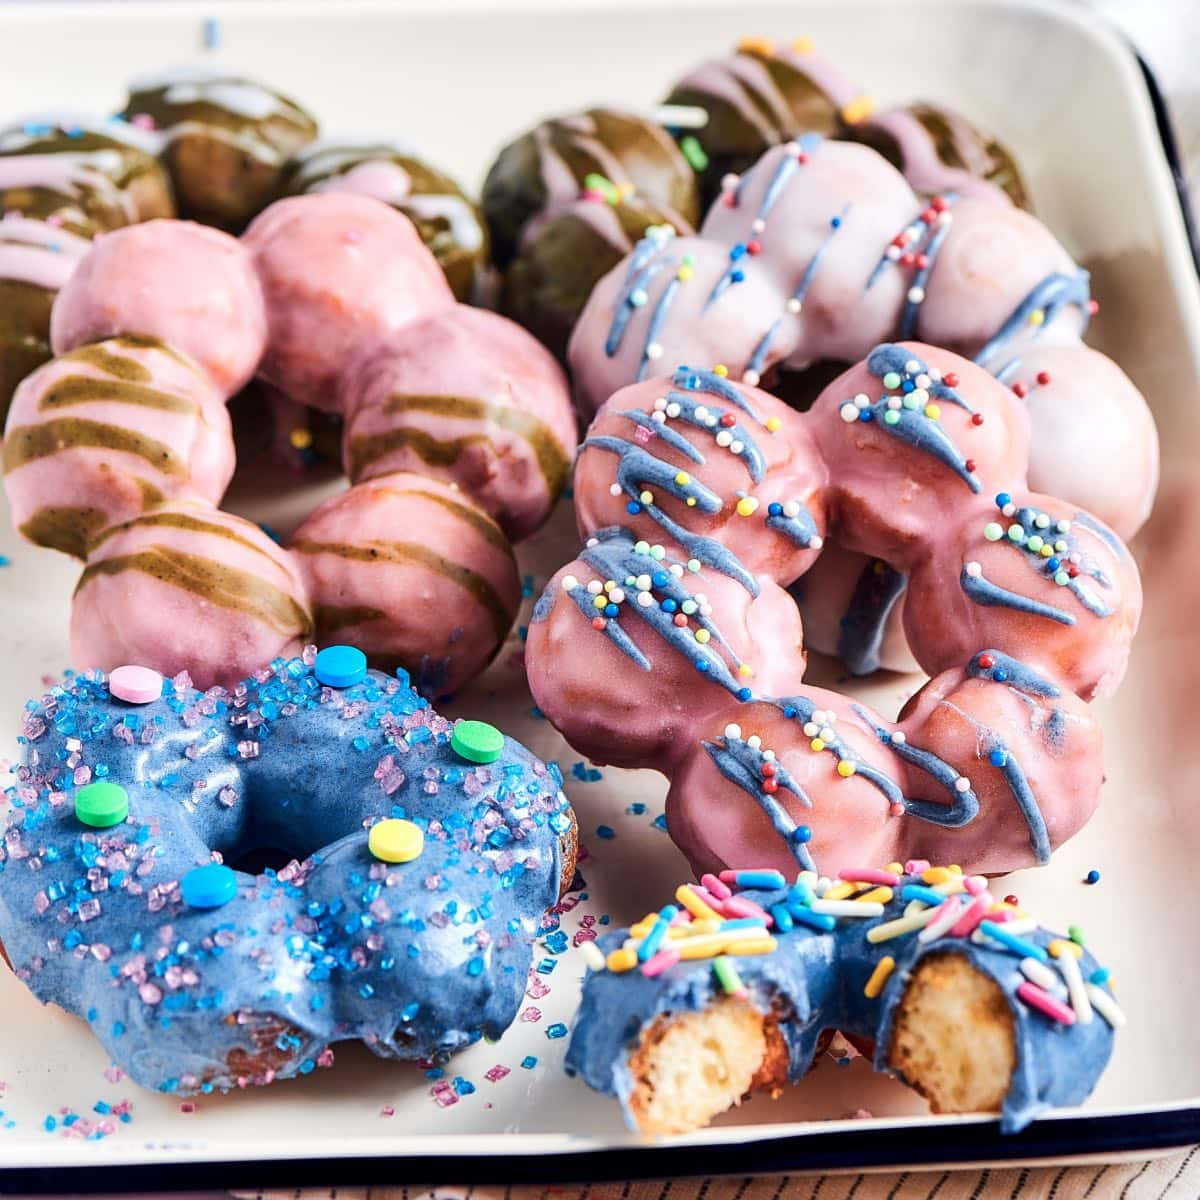 A Tray Of Donuts With Sprinkles